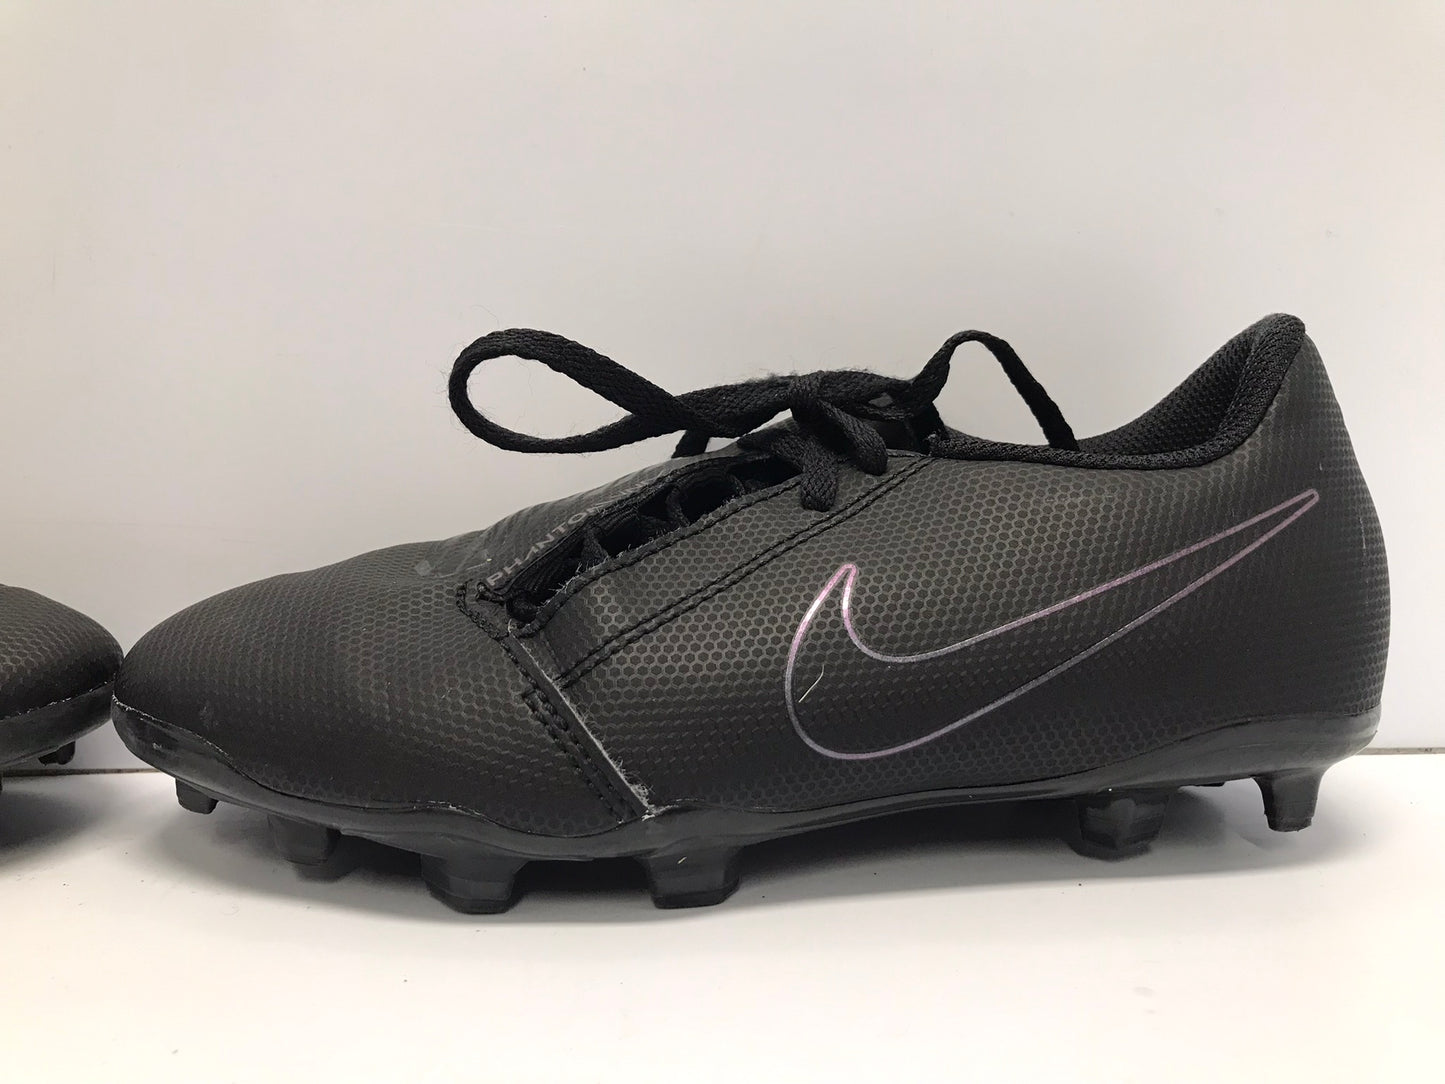 Soccer Shoes Cleats Child Size 2 Nike Phantom Black Purple Outstanding Quality